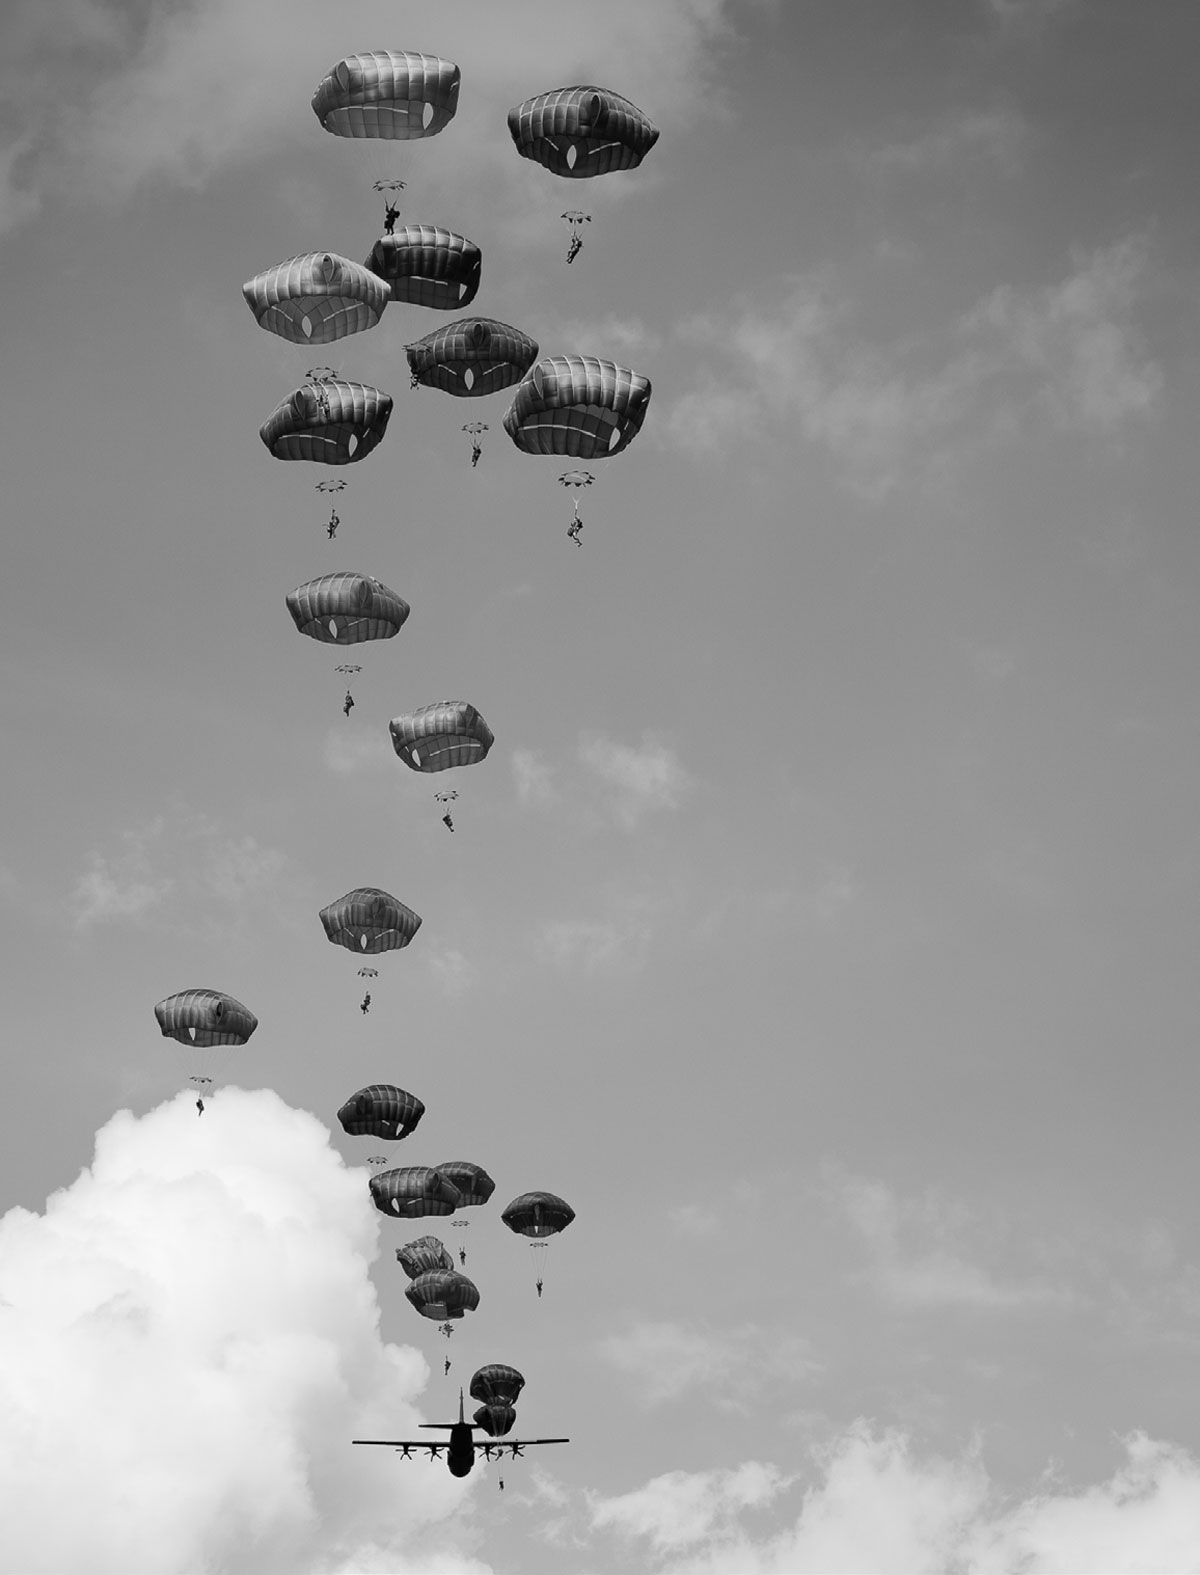 U.S. Army paratroopers assigned to the 173rd Airborne Brigade descend on Frida Drop Zone, Pordenone, Italy, 31 August 2023